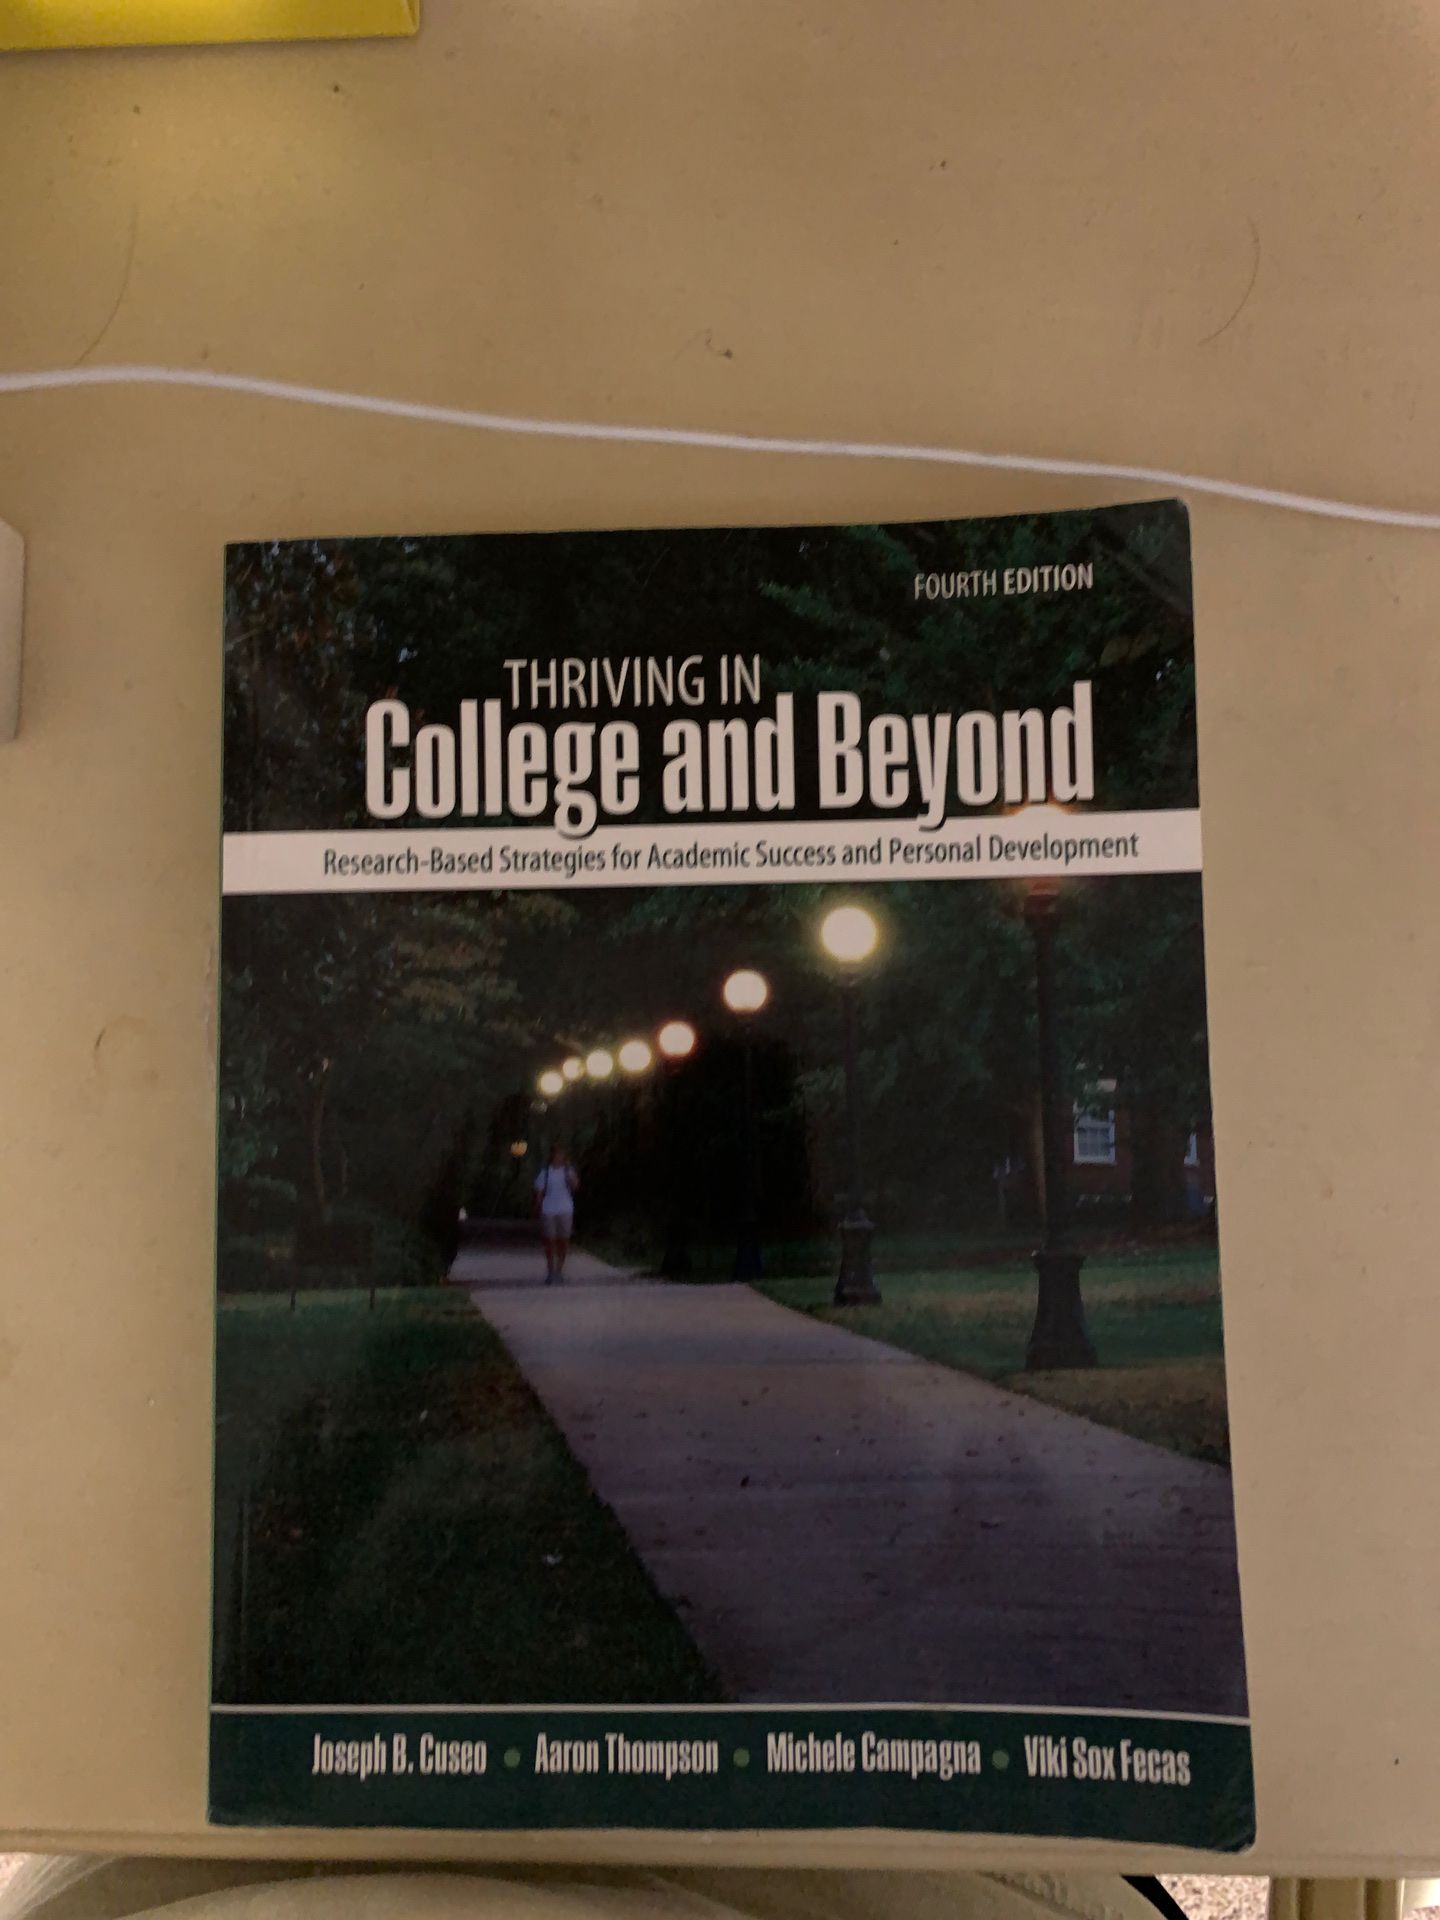 Thriving in College and Beyond book!